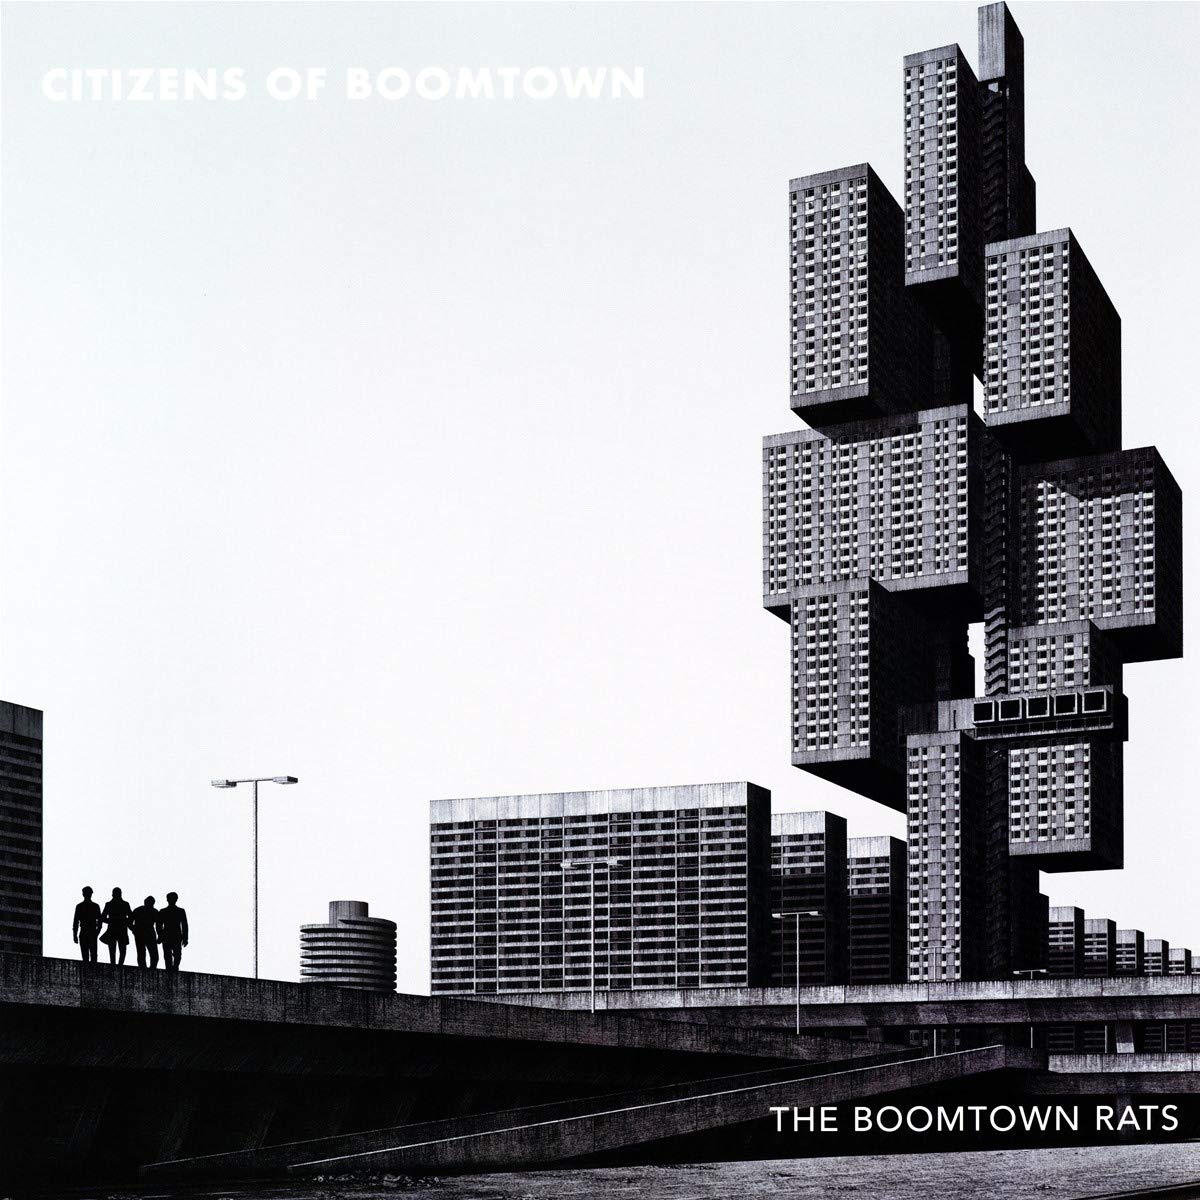 The Boomtown Rats-Citizens Of Boomtown-(538592342)-CD-FLAC-2020-WRE Download